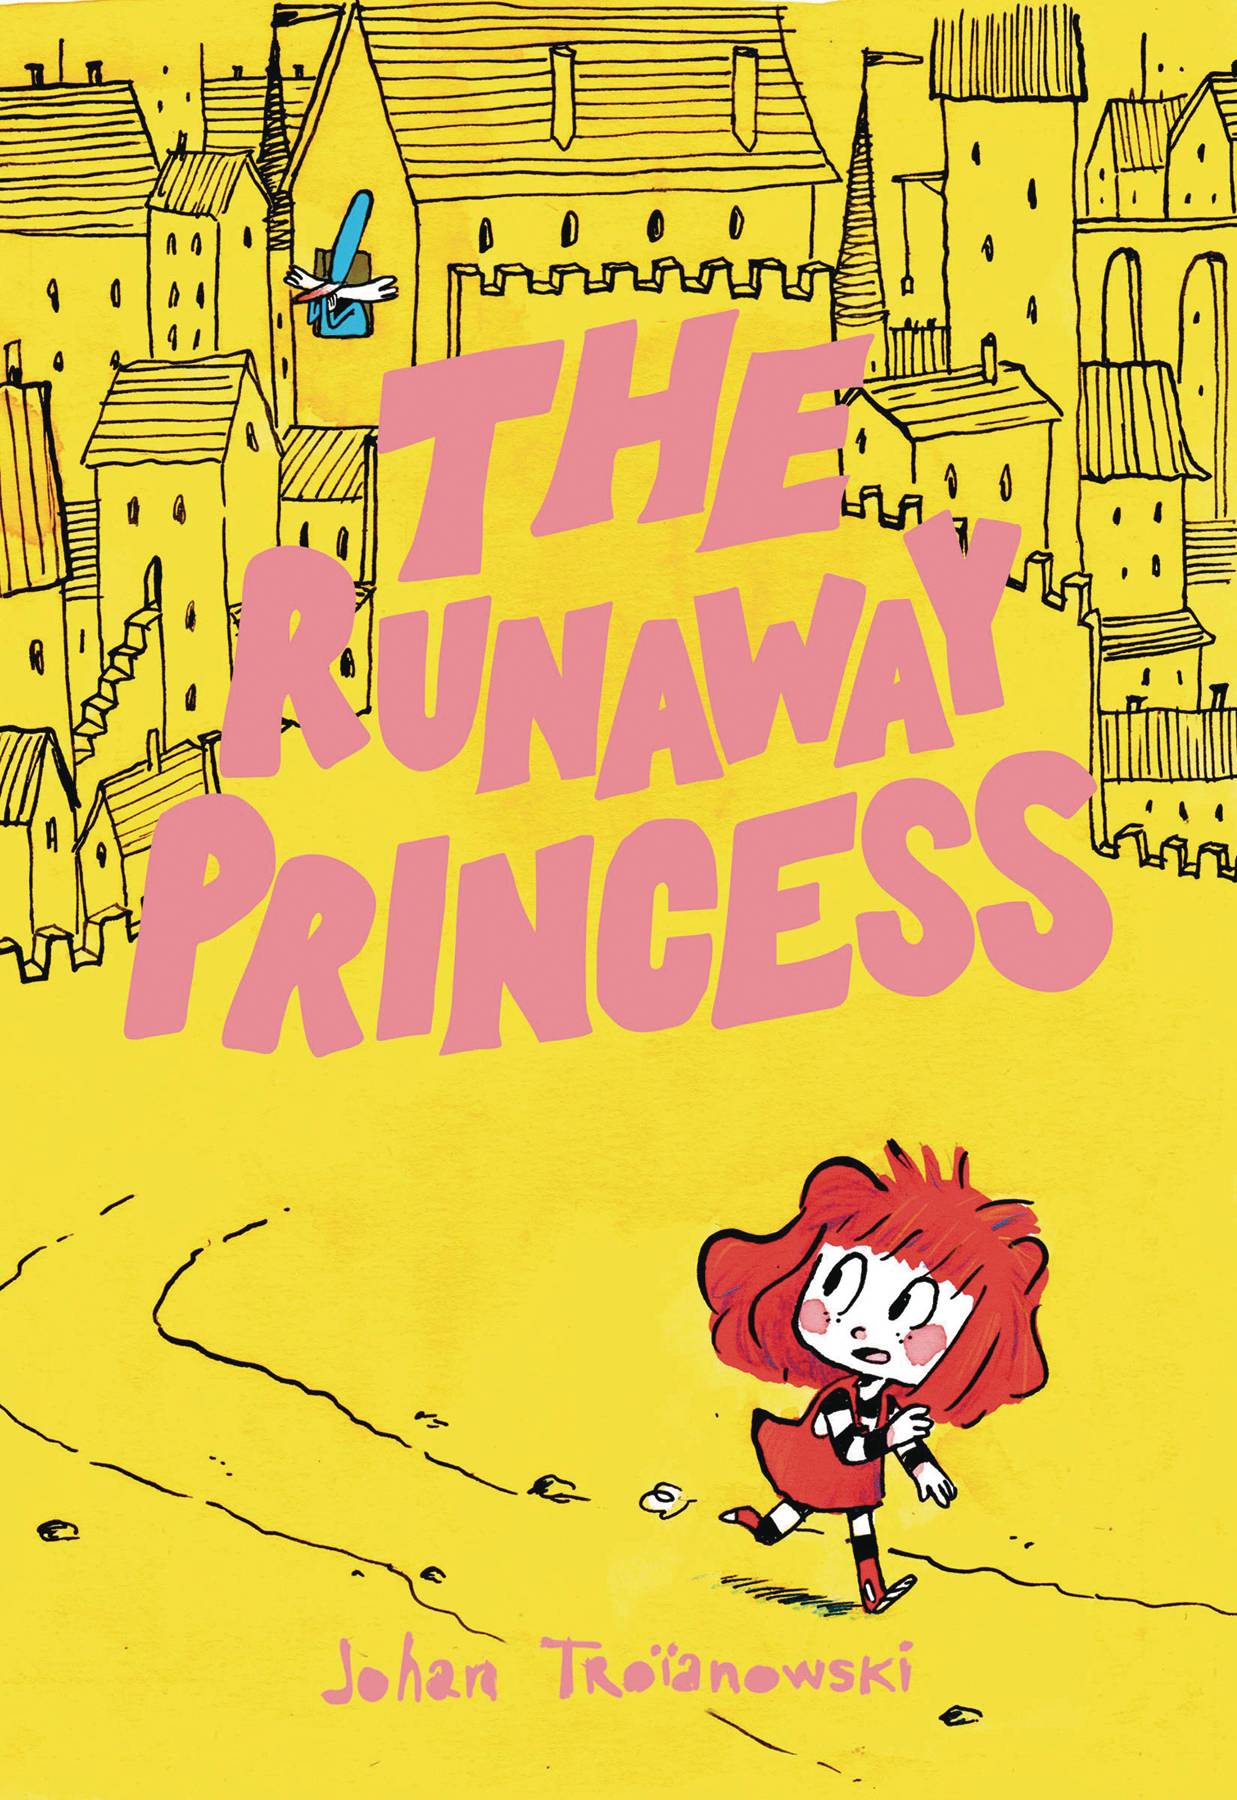 The Runaway Princess Softcover SC Graphic Novel